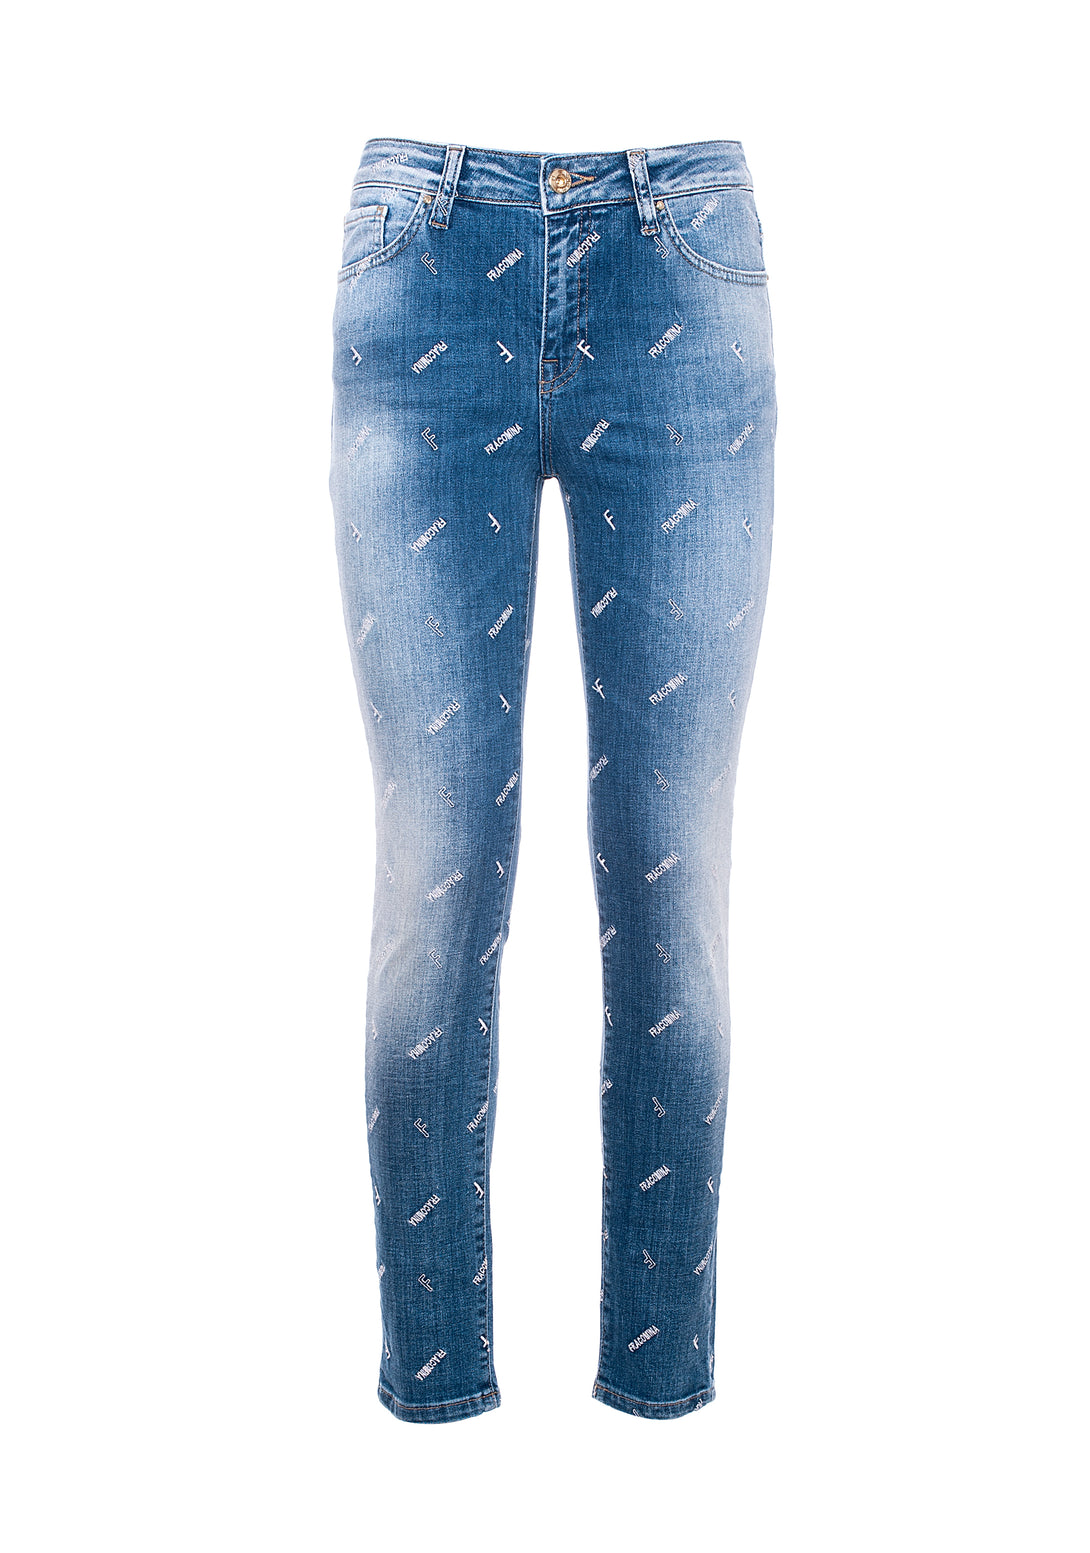 Jeans skinny fit made in stretch denim with middle wash and logo print Fracomina FP21SP5030D40102-349